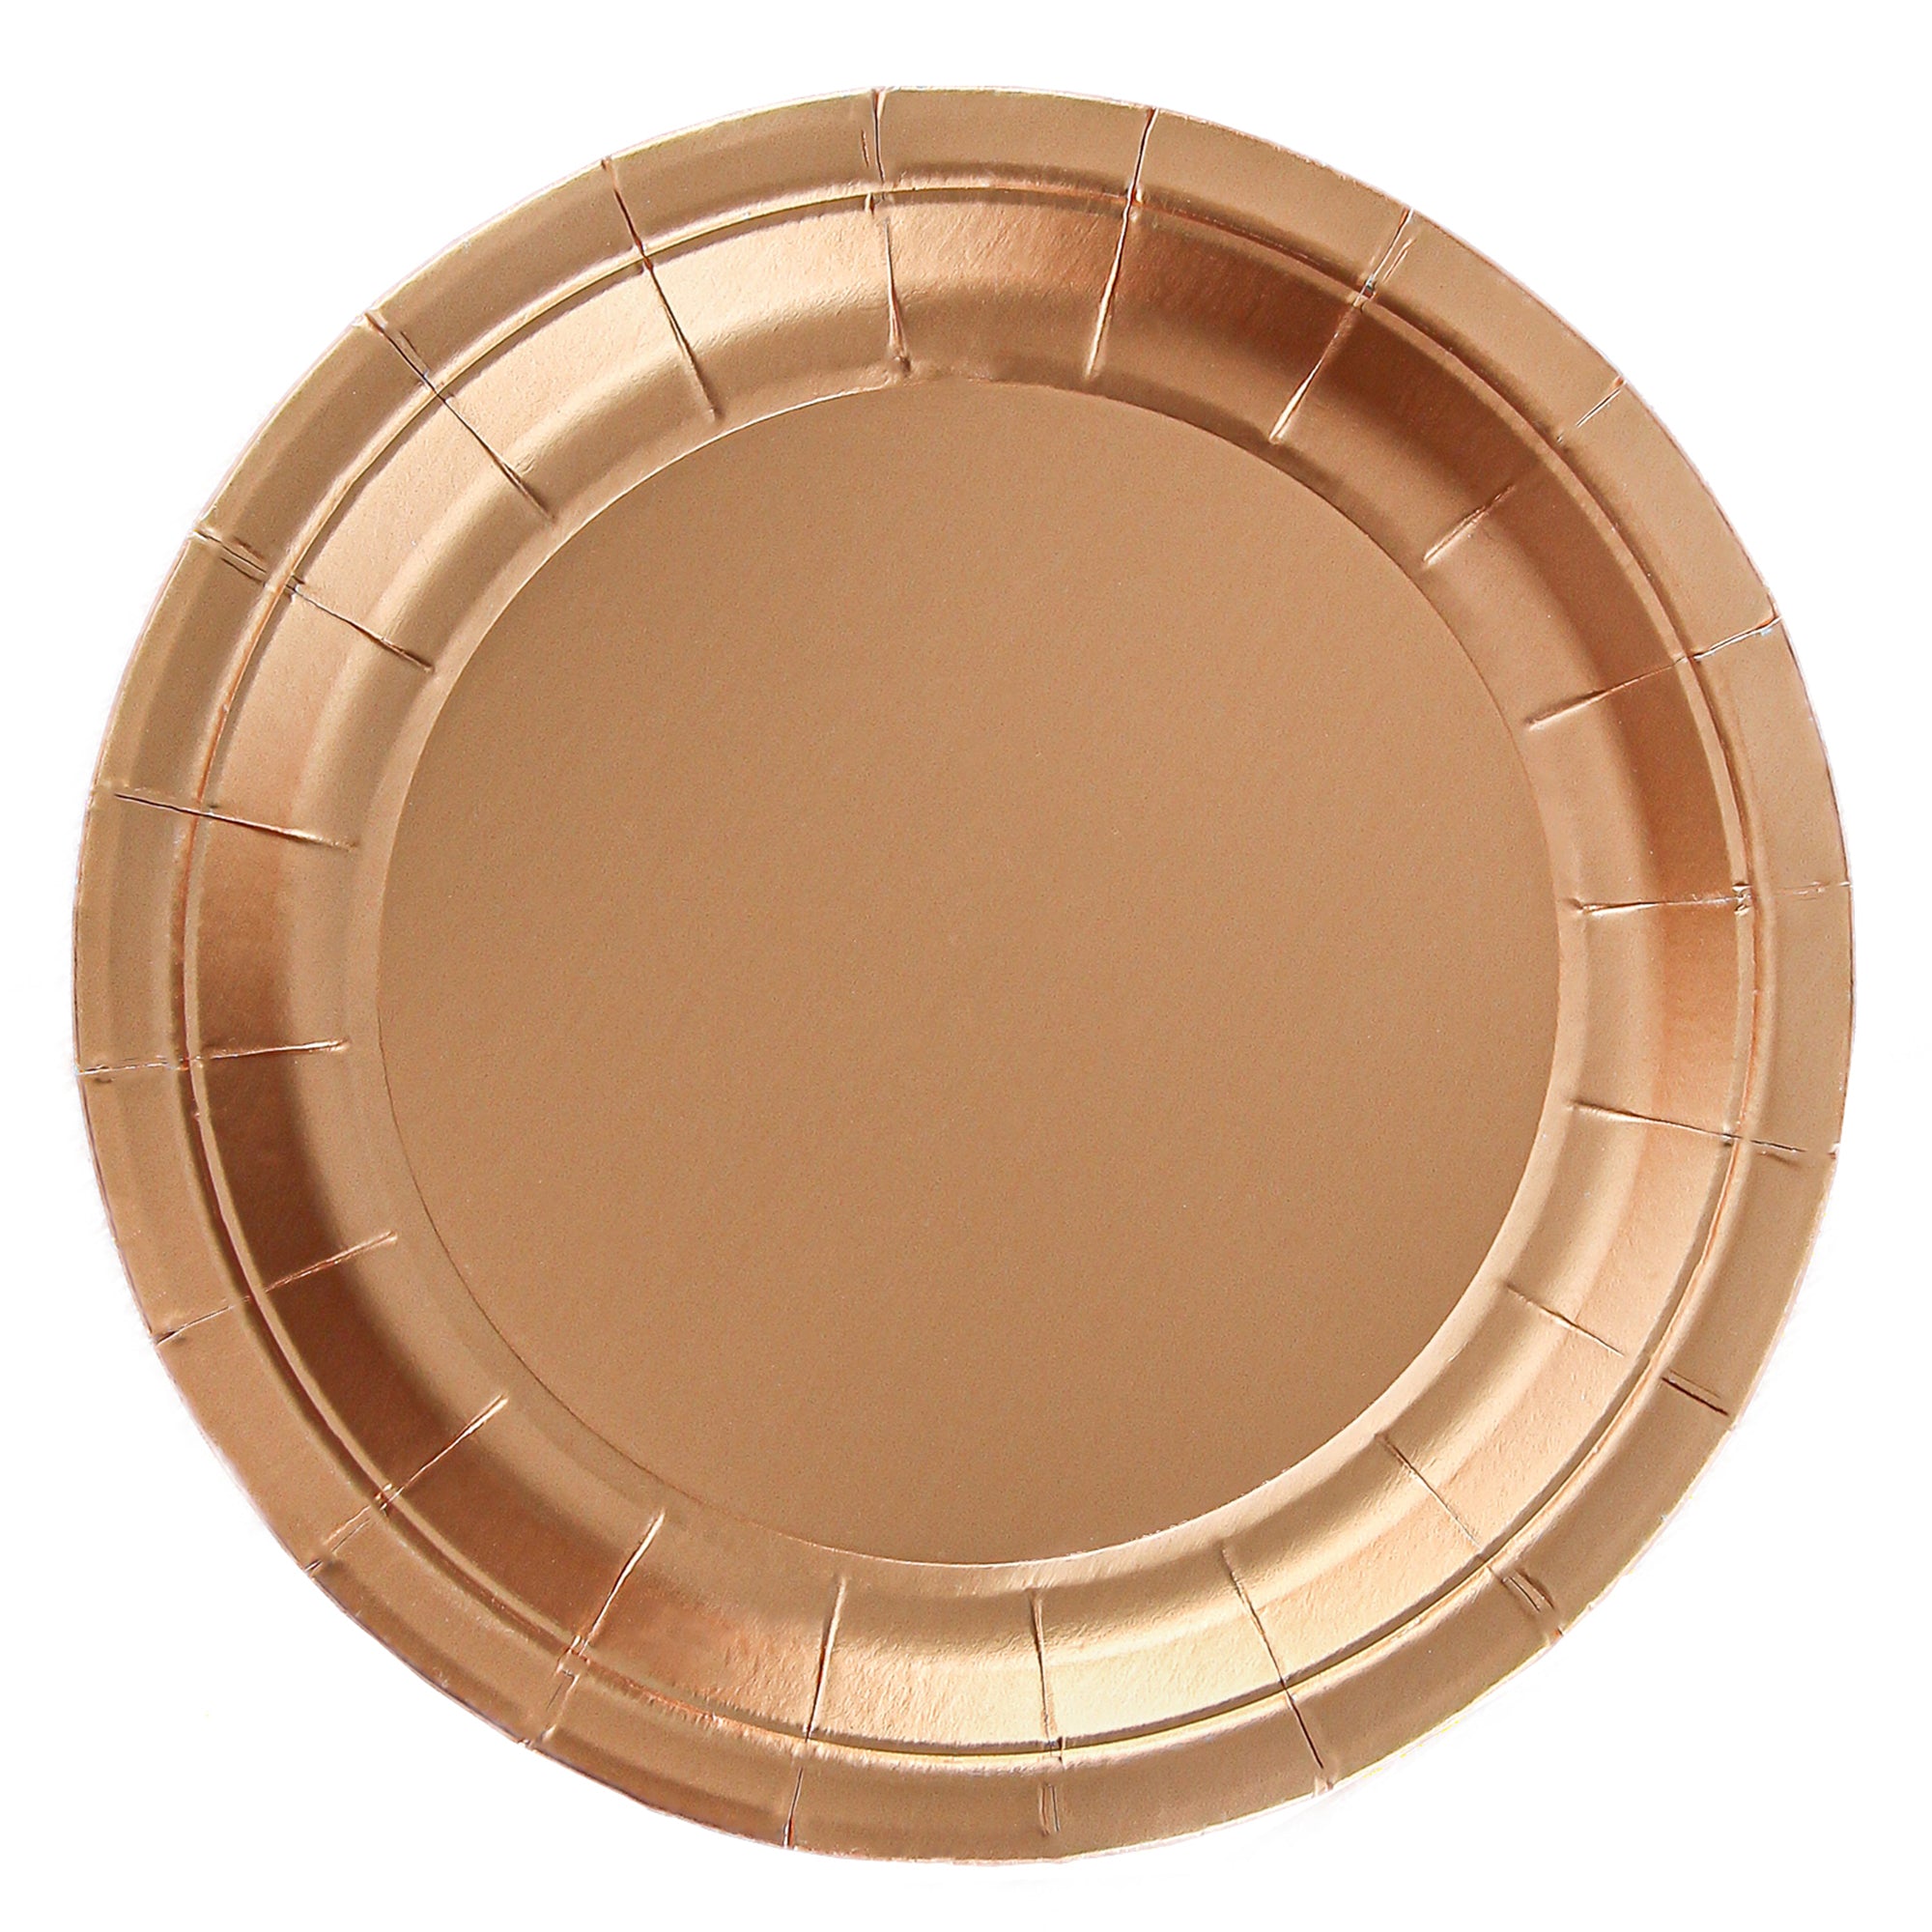 Chrome Copper Large Round Lunch Paper Plates, 9 Inches, 8 Count